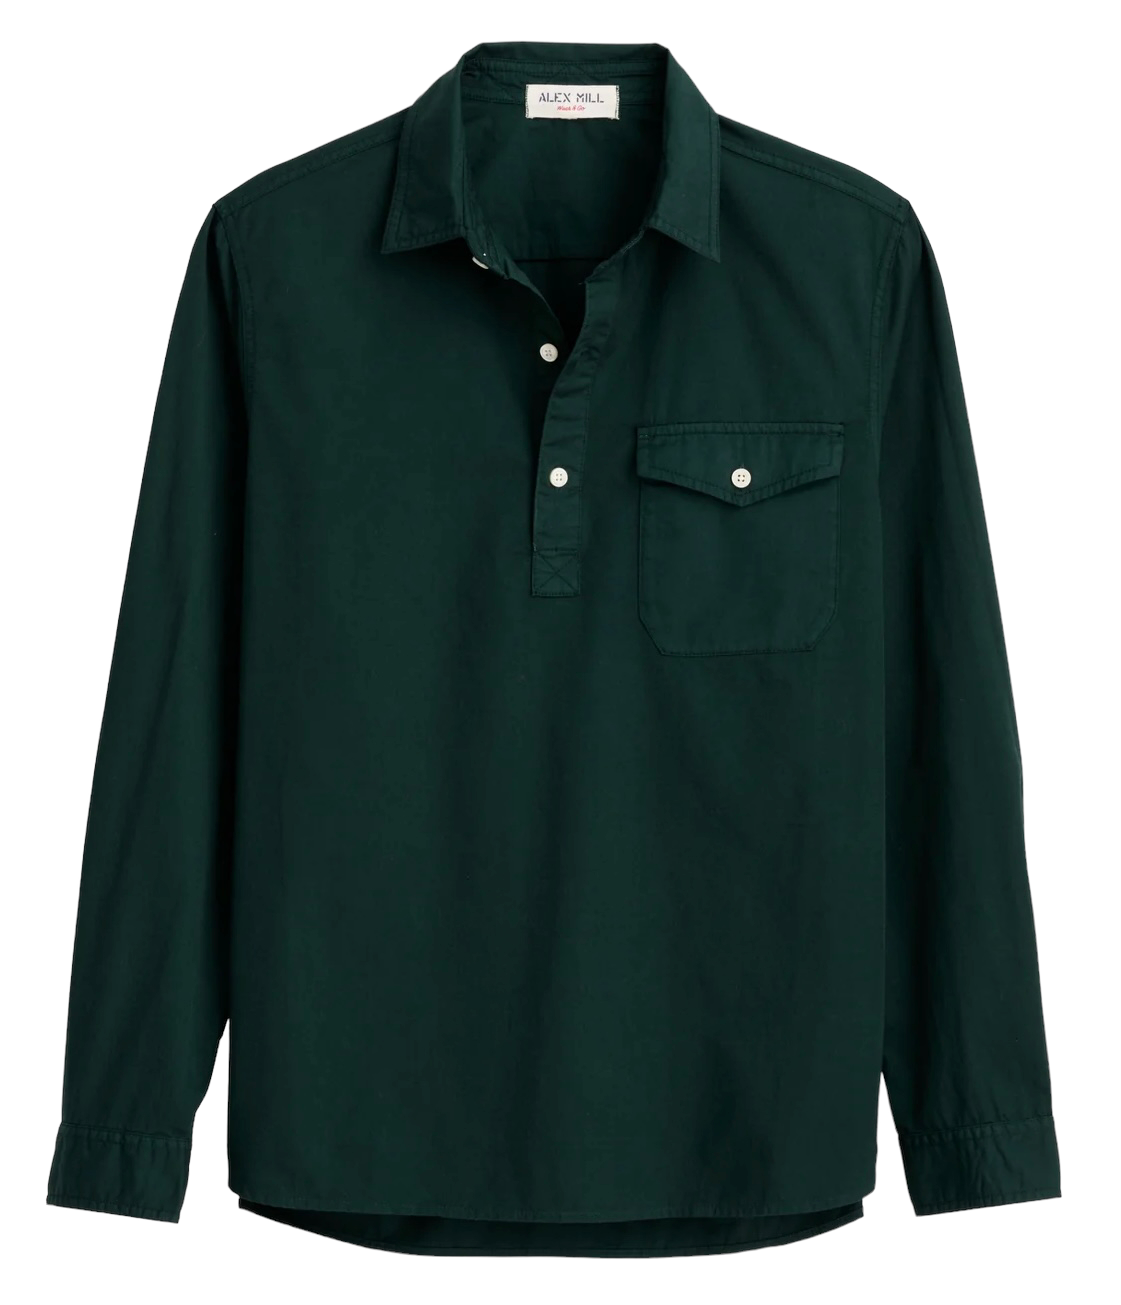 POPOVER SHIRT IN COTTON TWILL